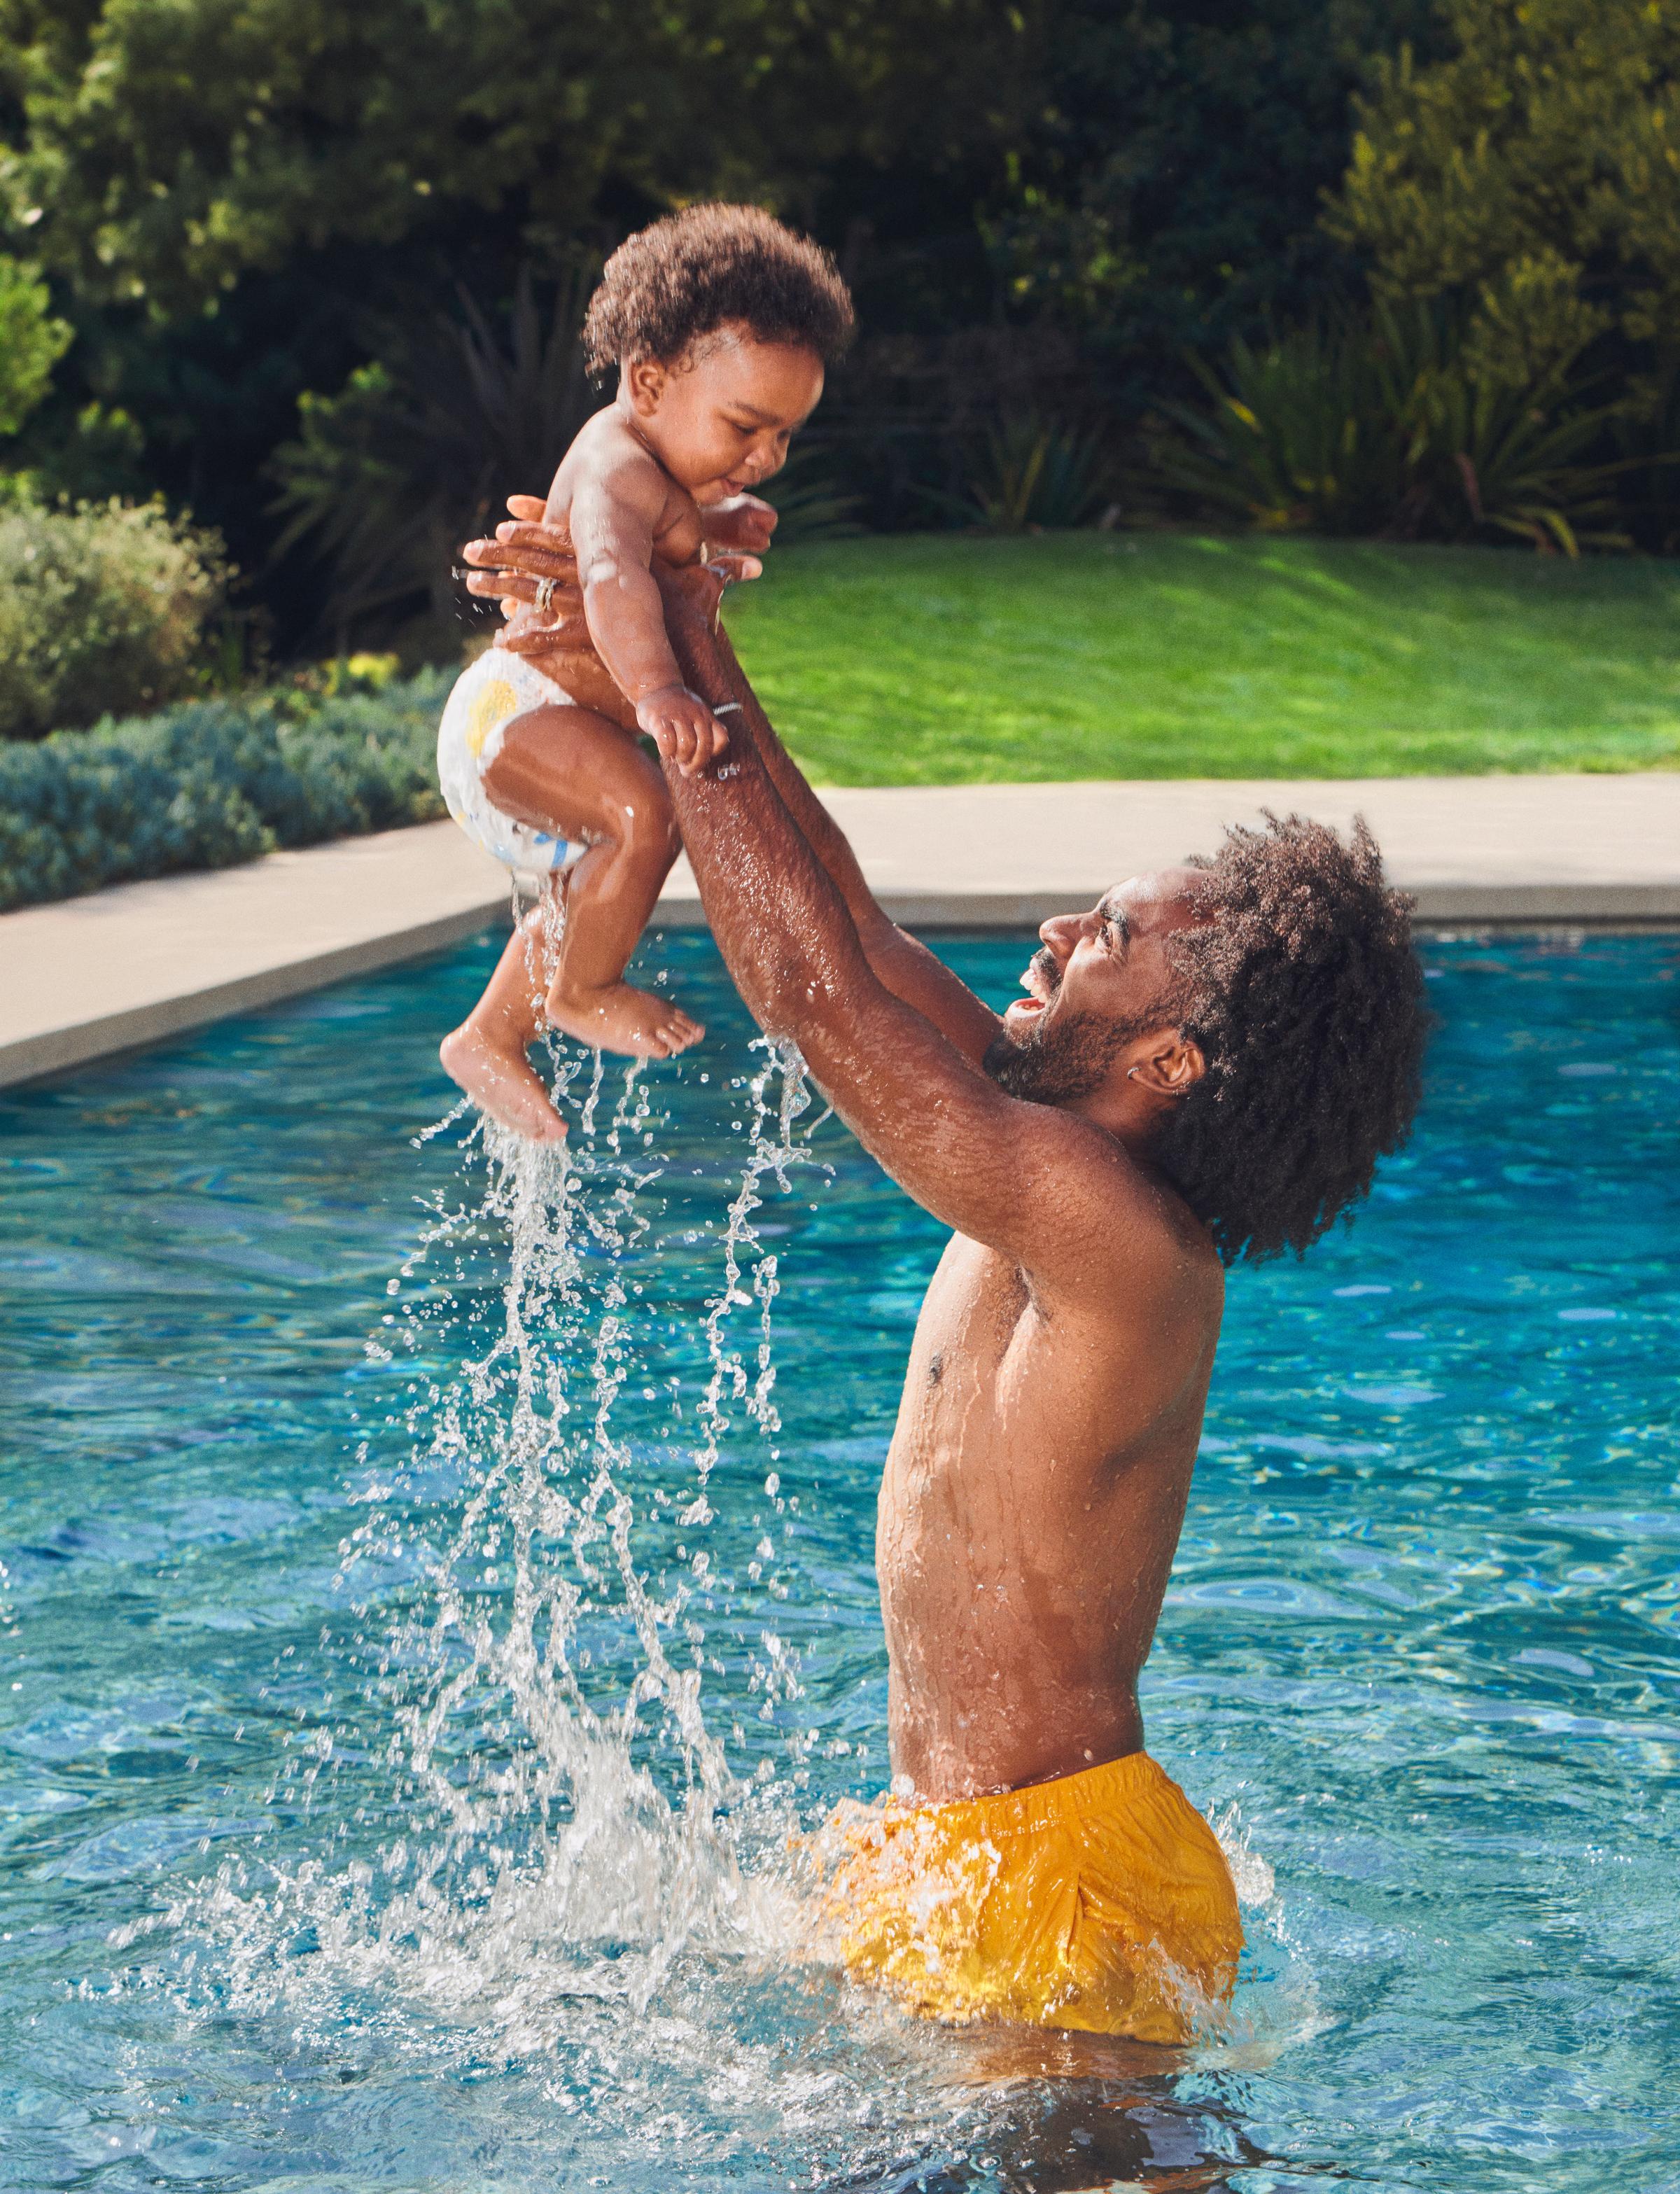 A man and baby playing in a pool